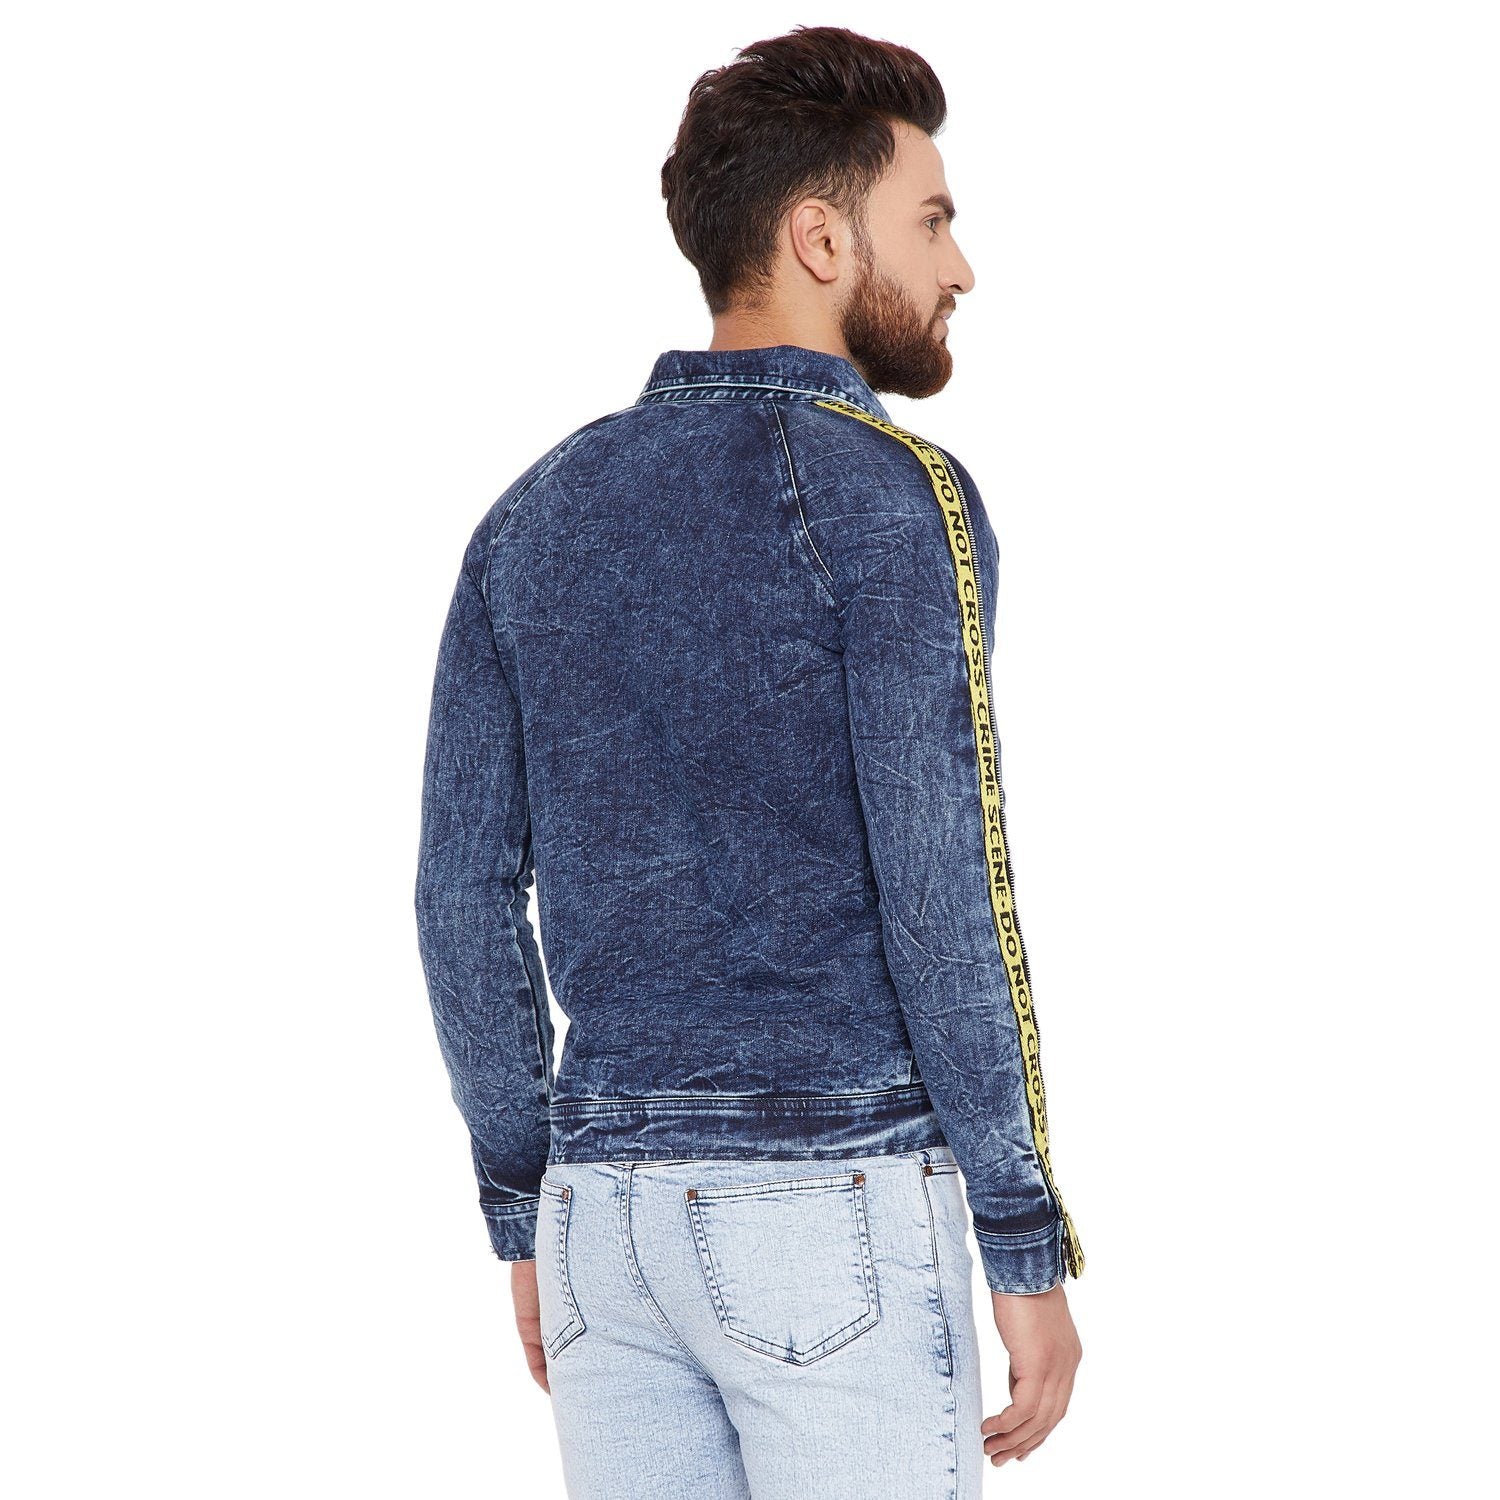 A Step-by-Step Guide to Creating a Patriotic Denim Jacket